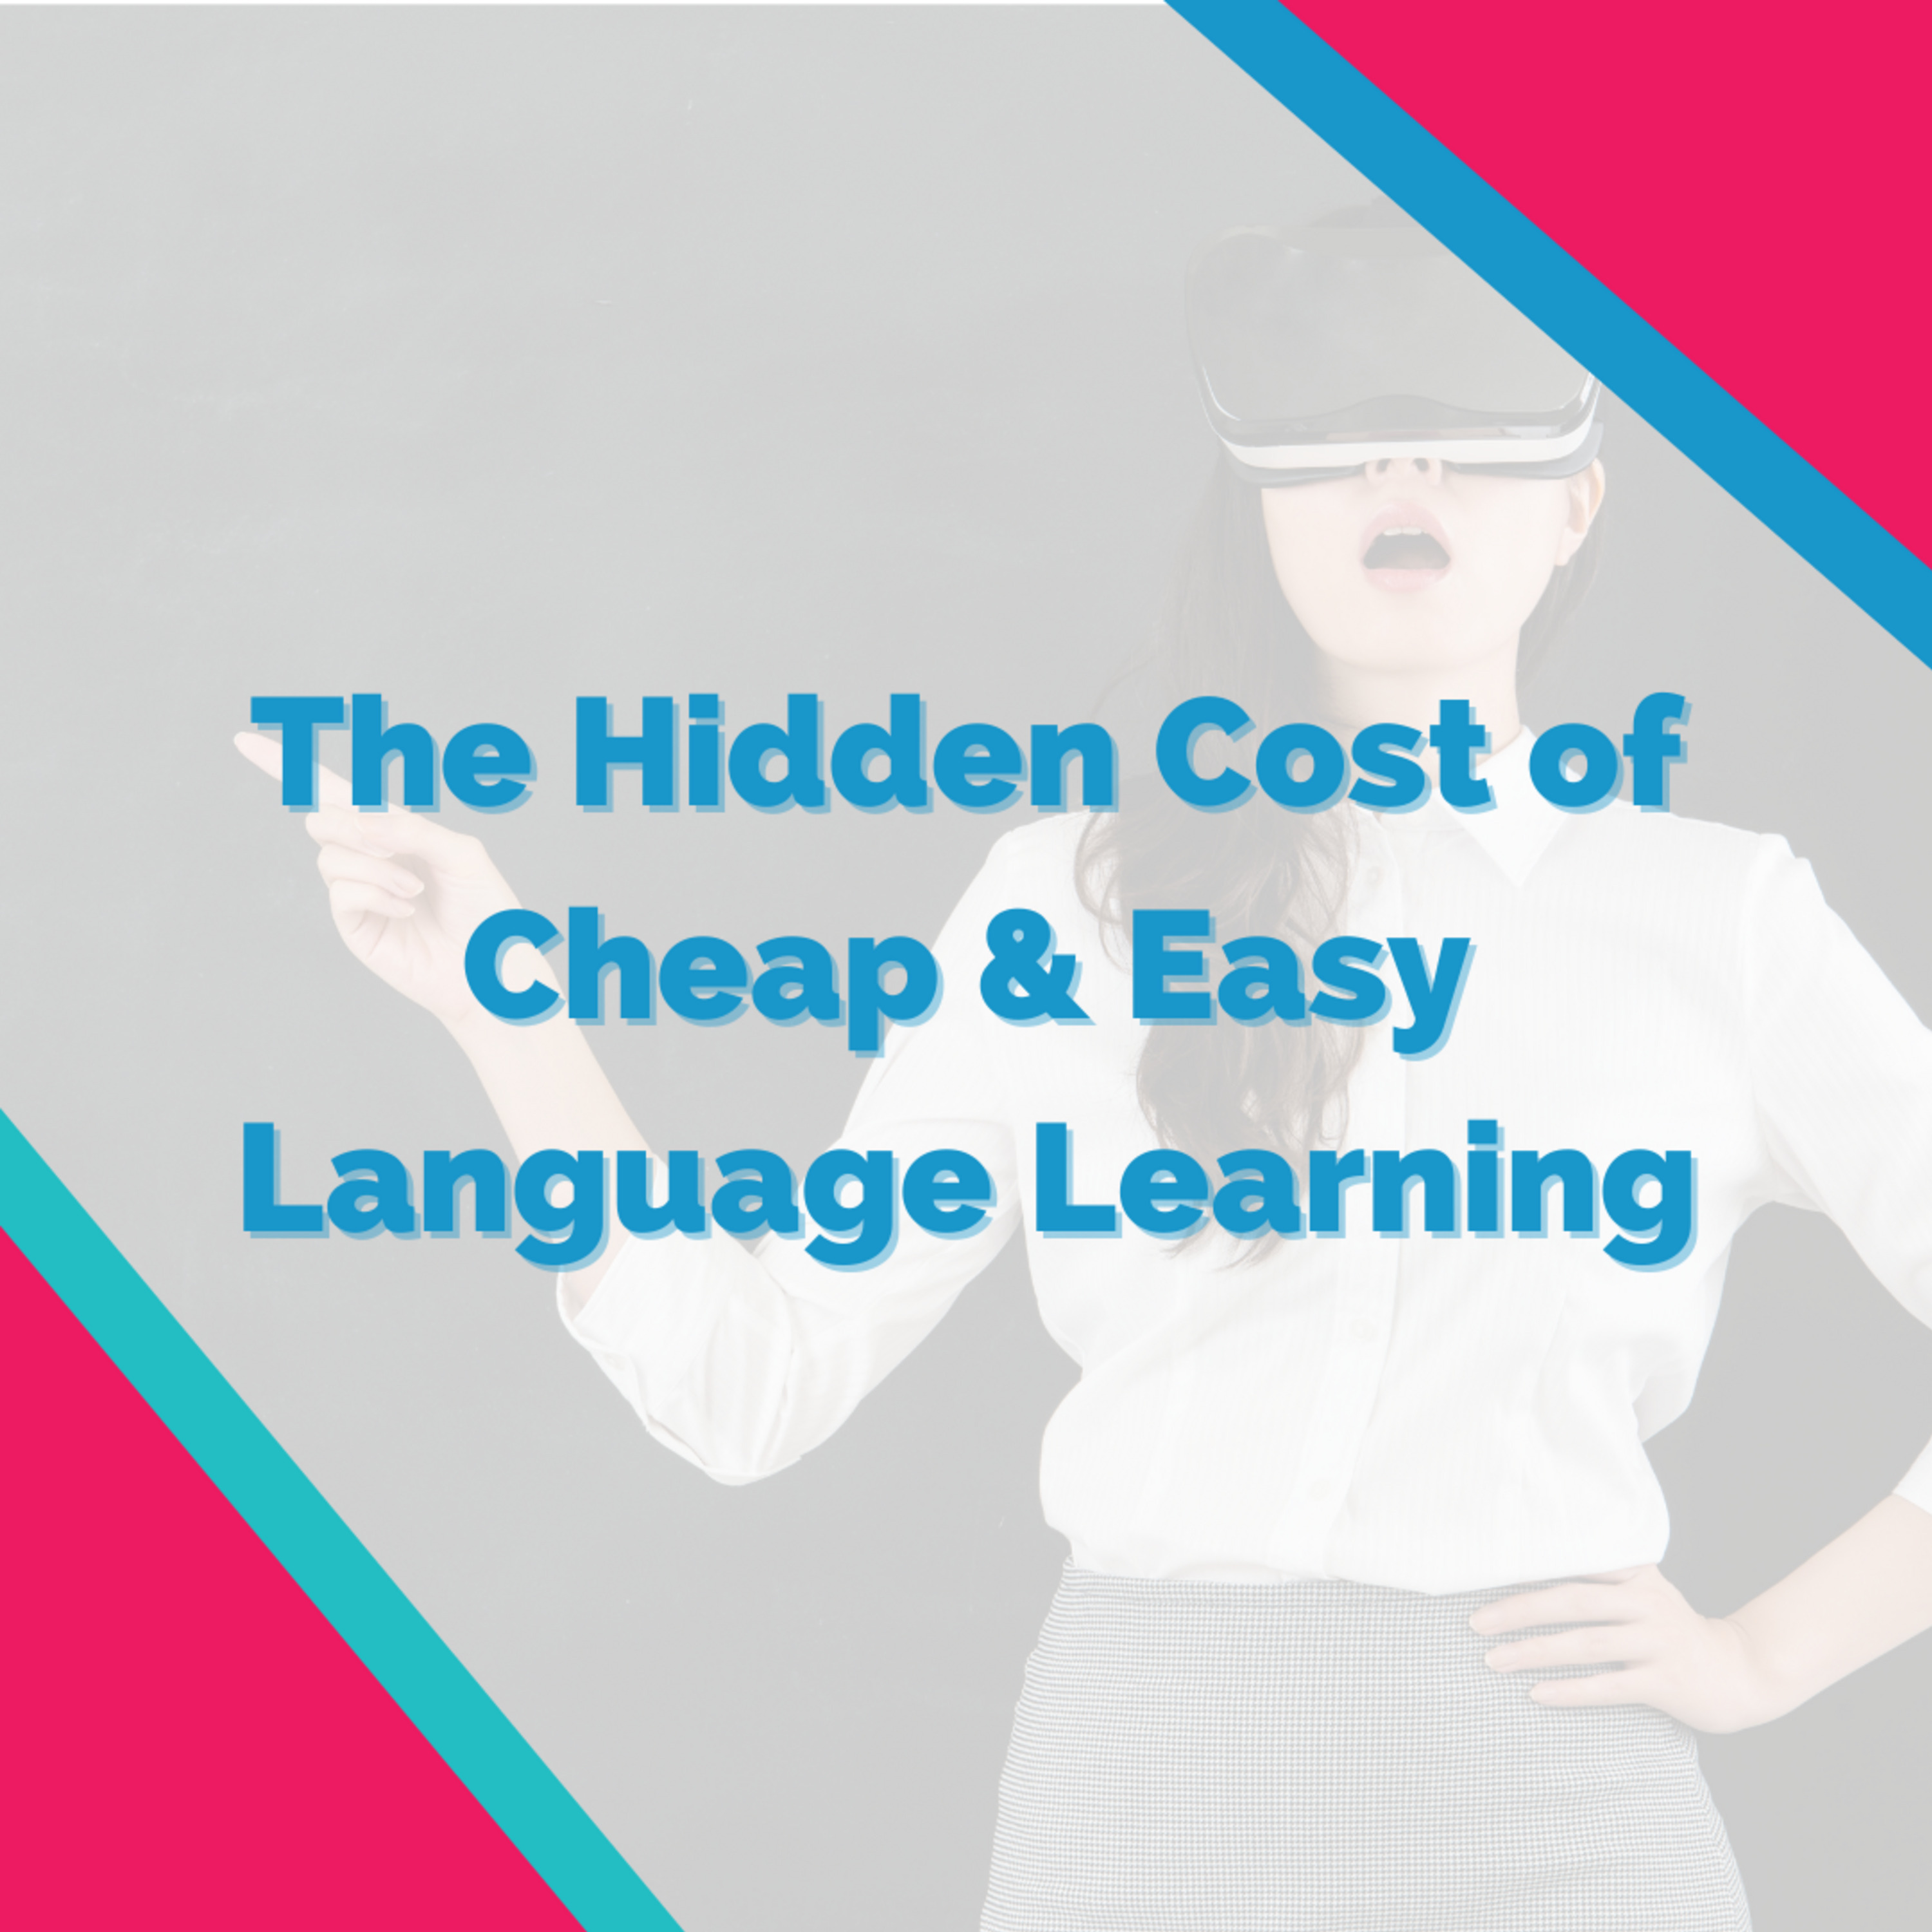 The Hidden Cost of Cheap & Easy Language Learning